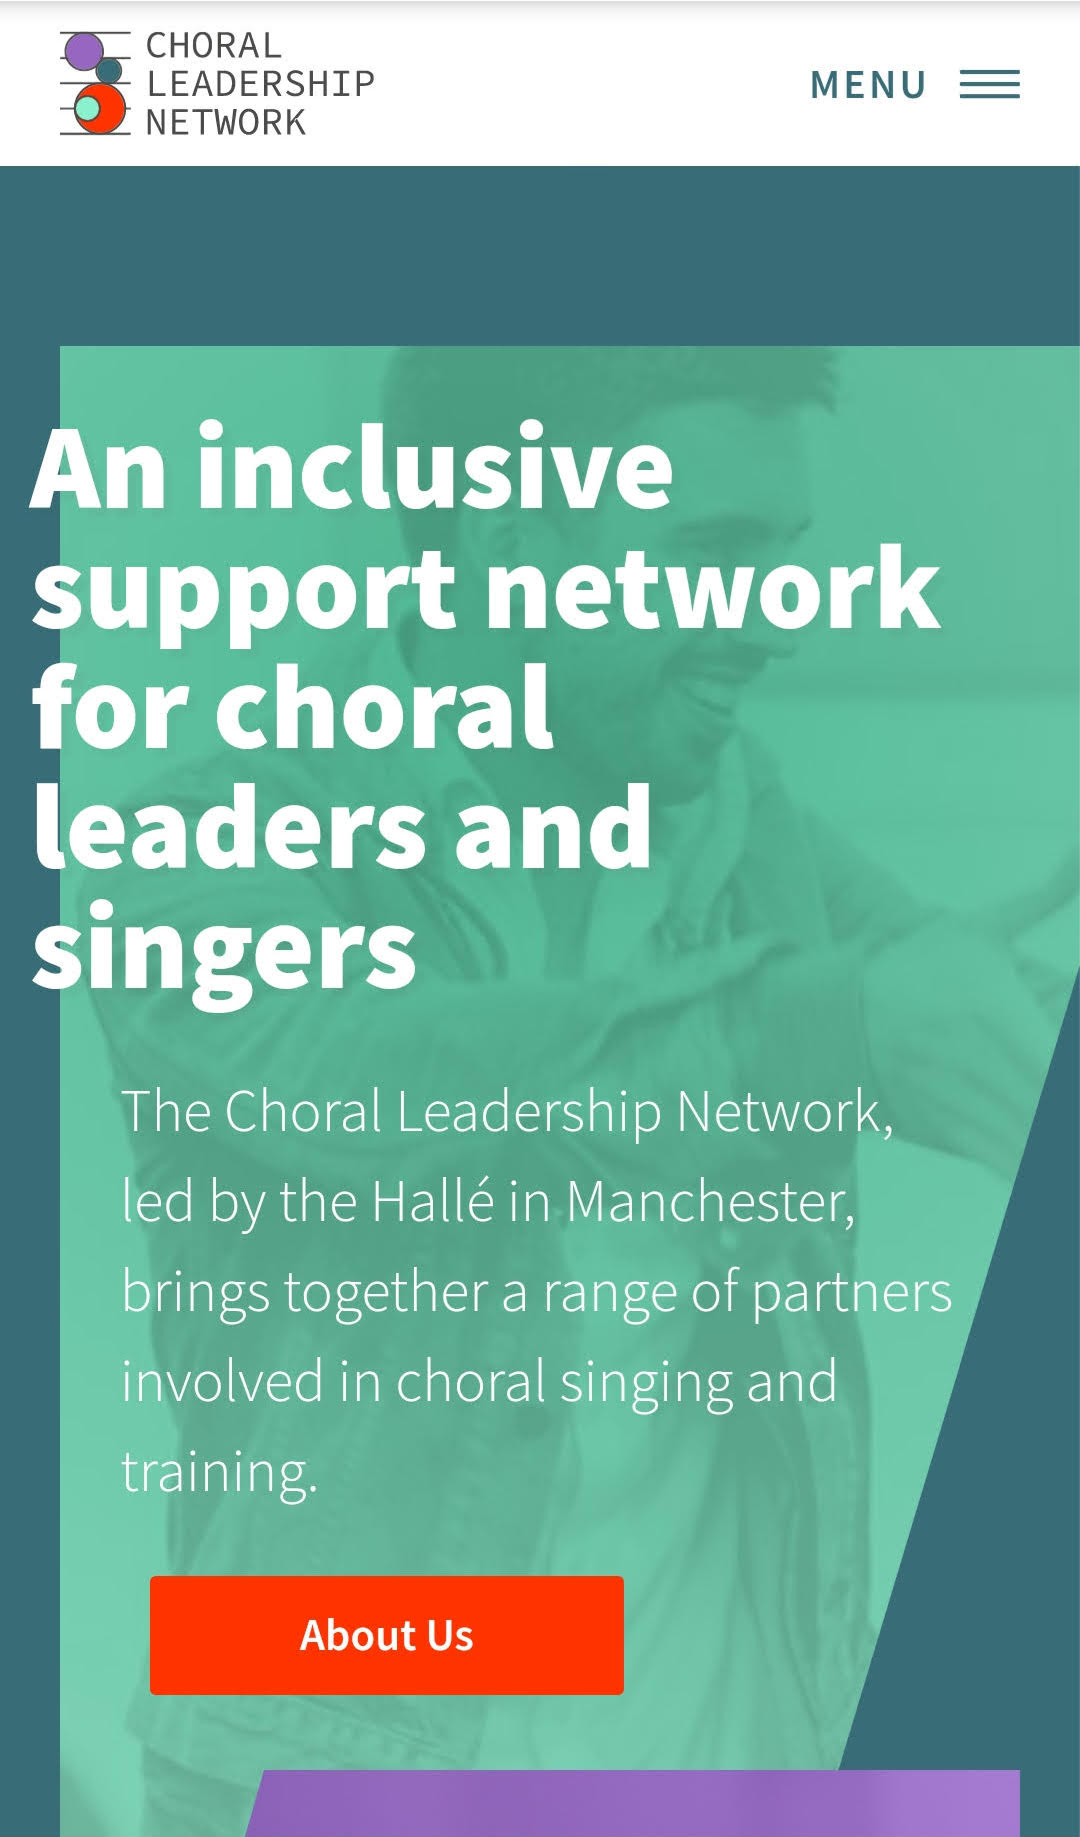 The choral leadership network on mobile